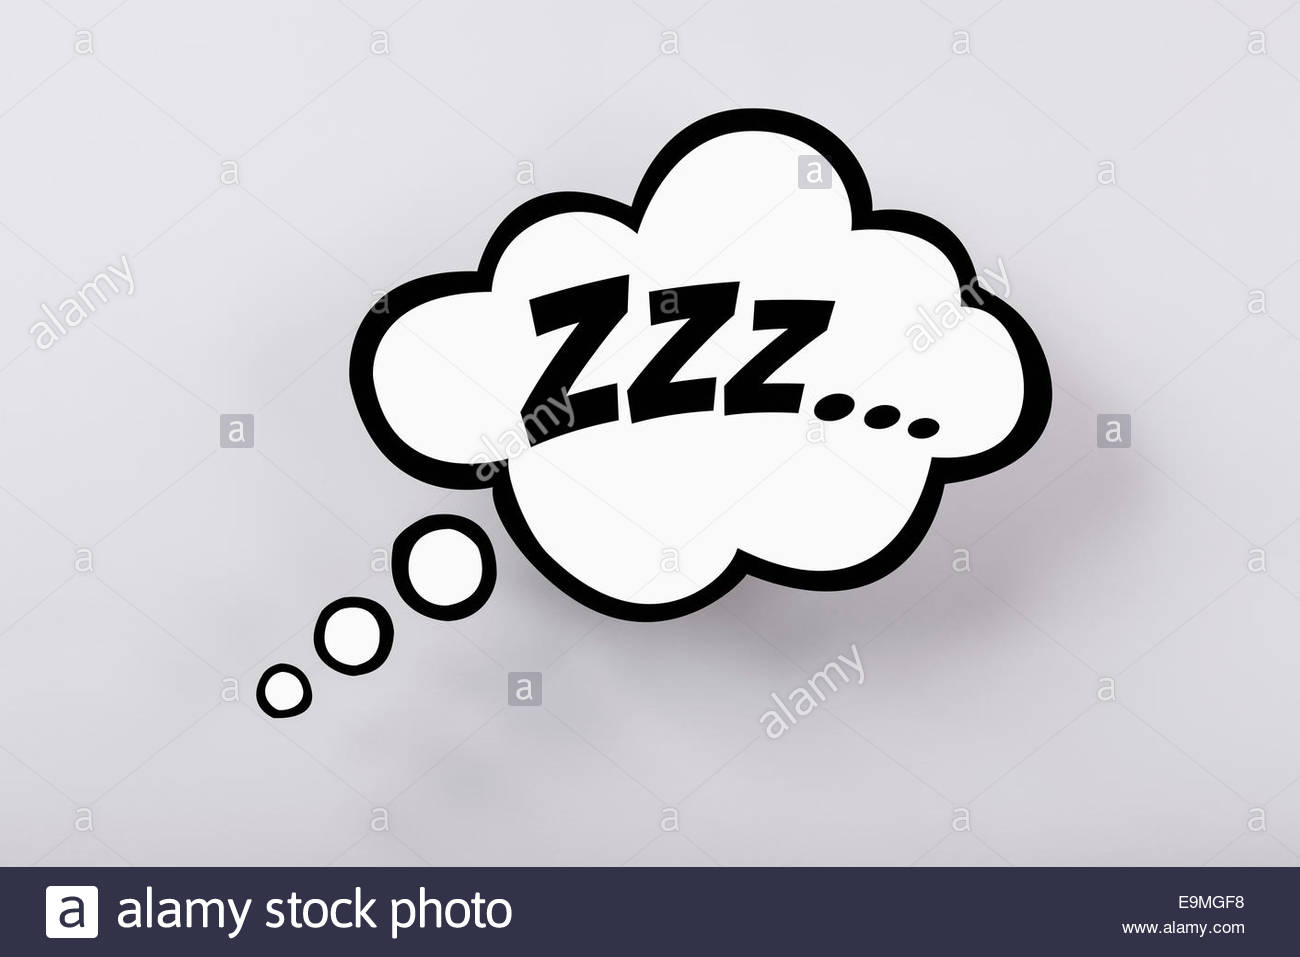 Snoring Sign In Thought Bubble Against Gray Background Stock Photo